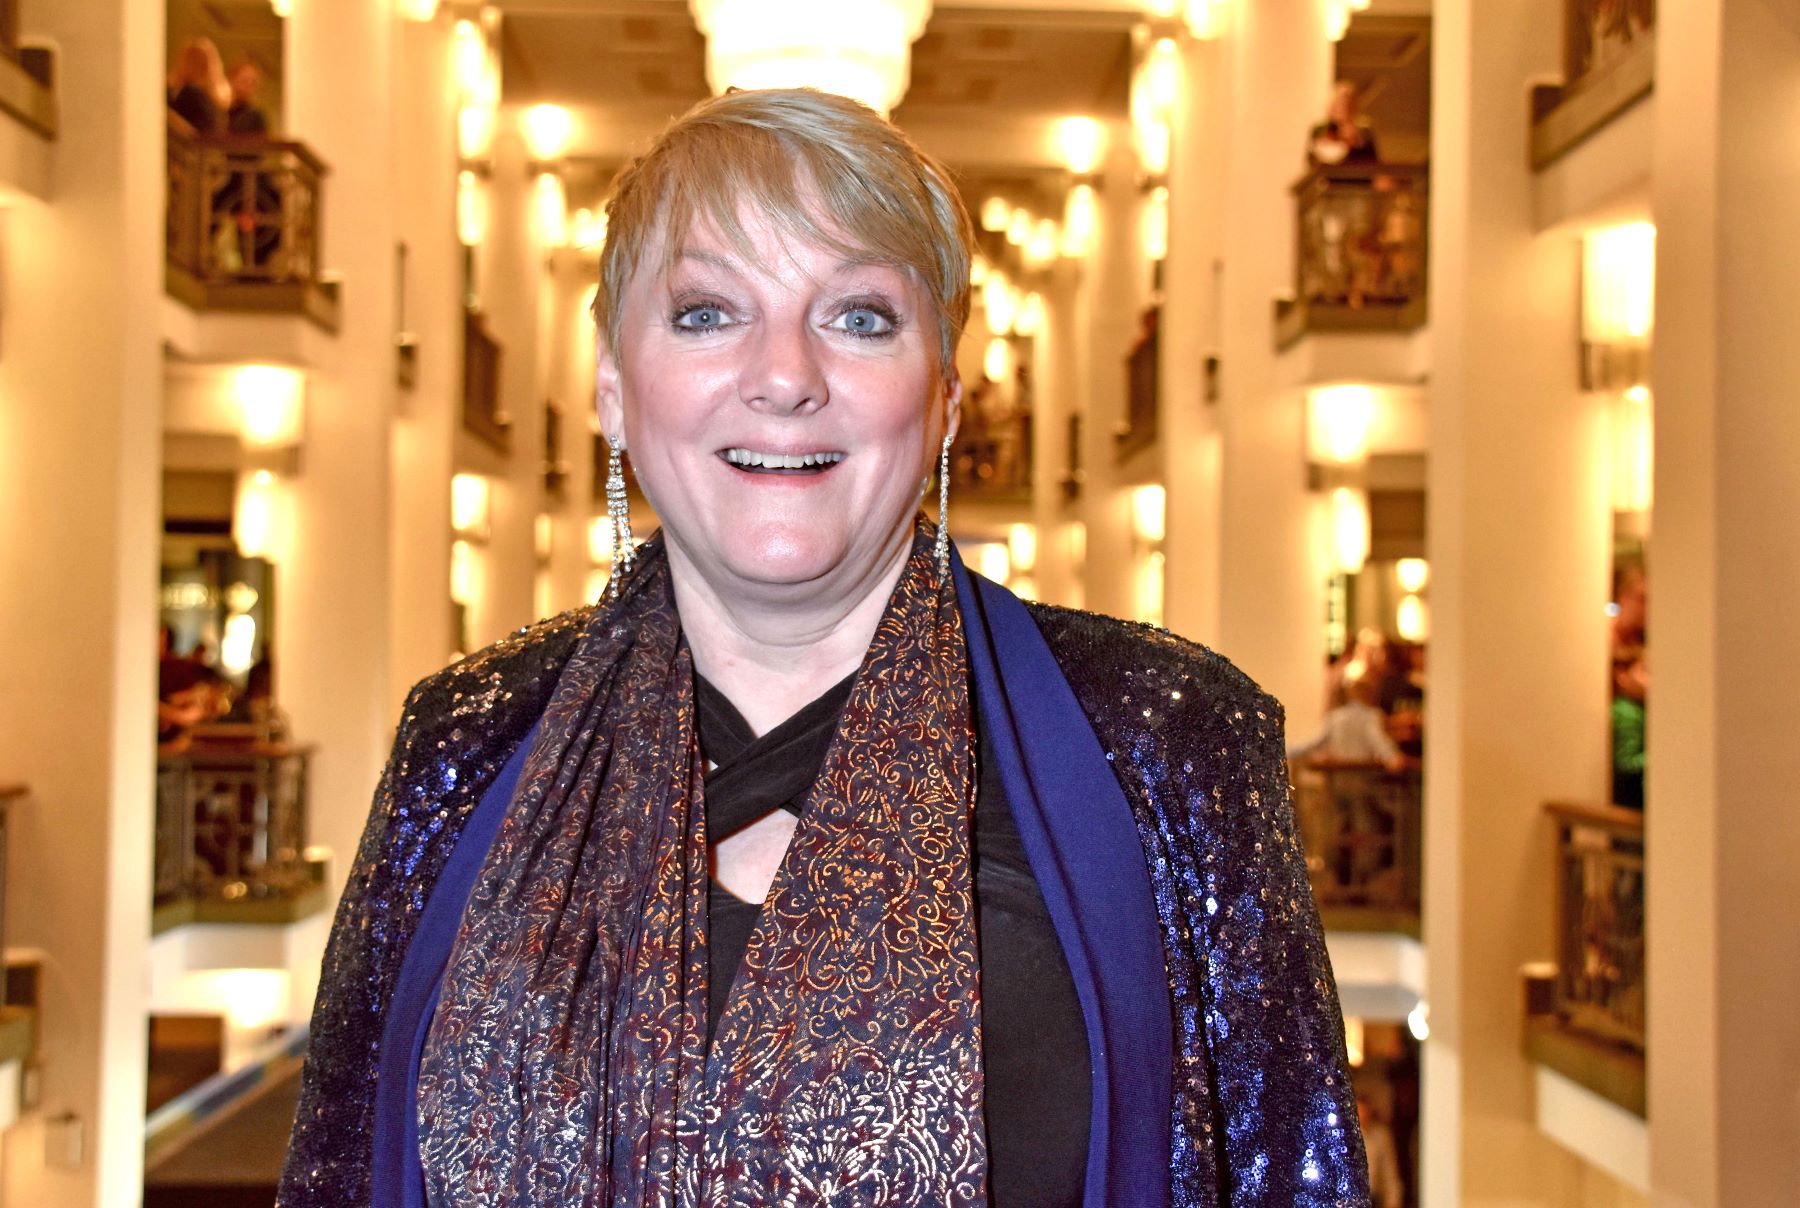 Alison Arngrim at the Young Show 'Im Labyrinth der Buecher' in Berlin, Germany